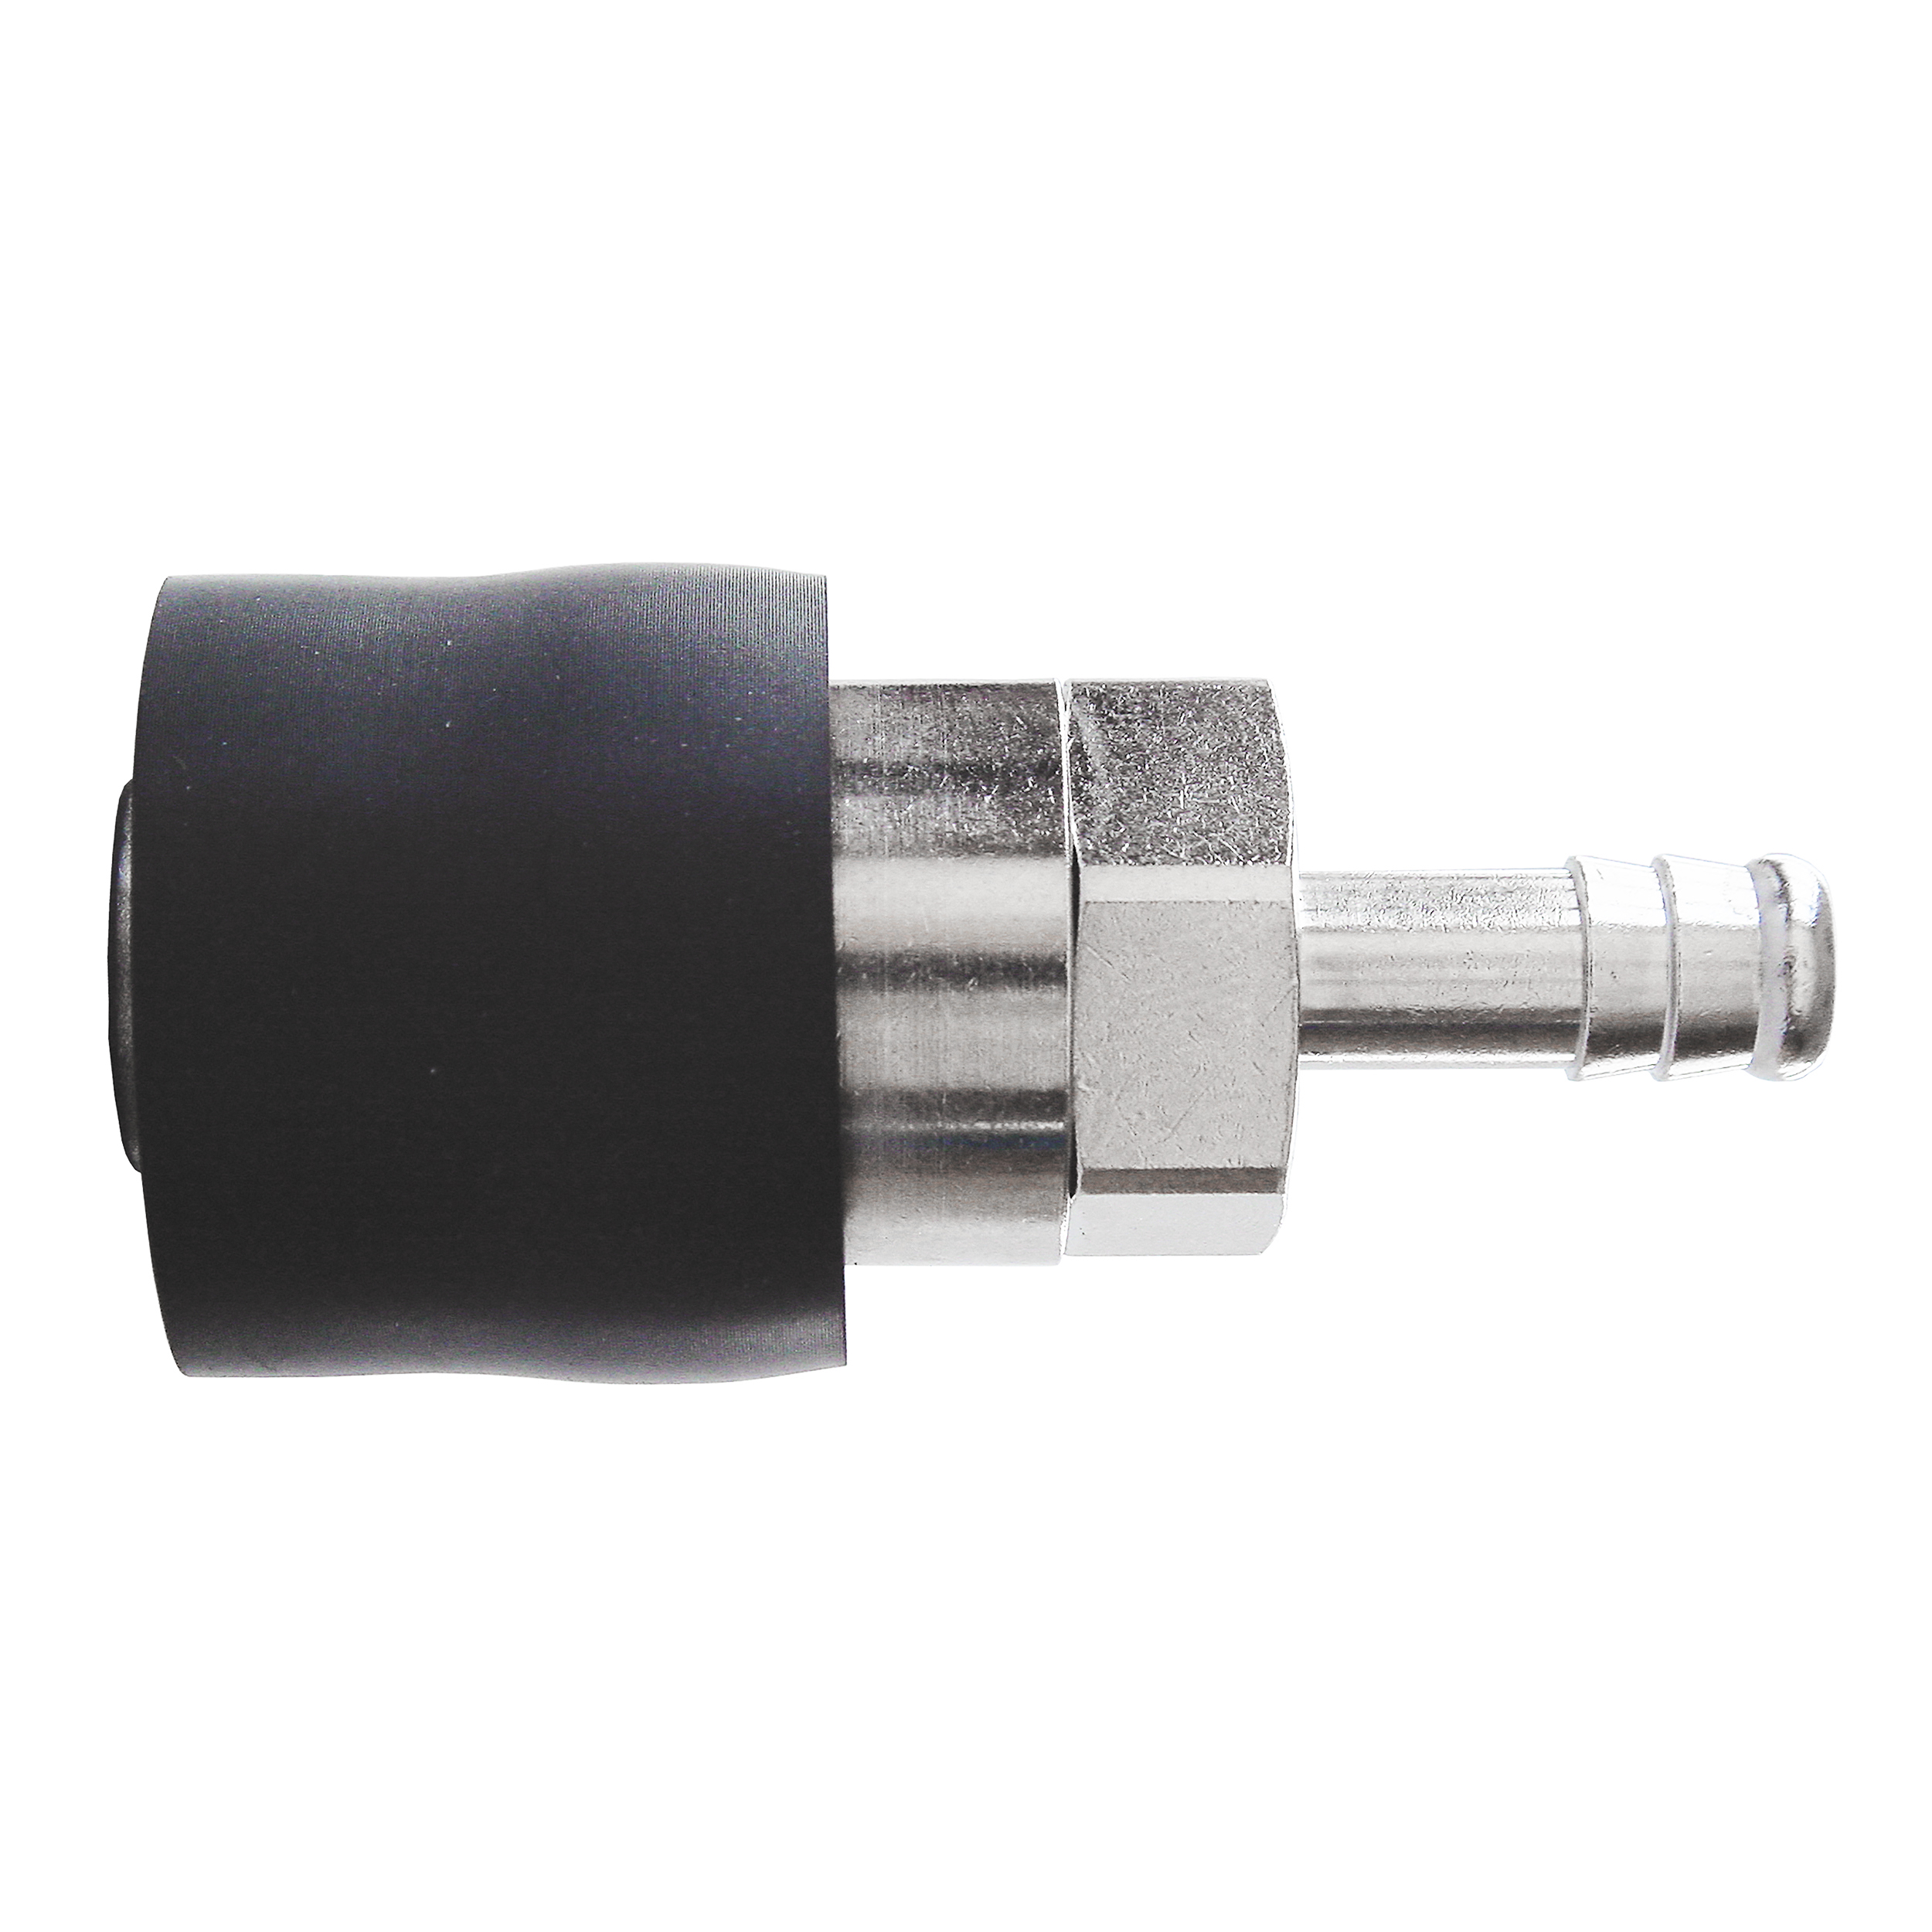 DN 7.8 safety coupling, hose nozzle and protective rubber sleeve